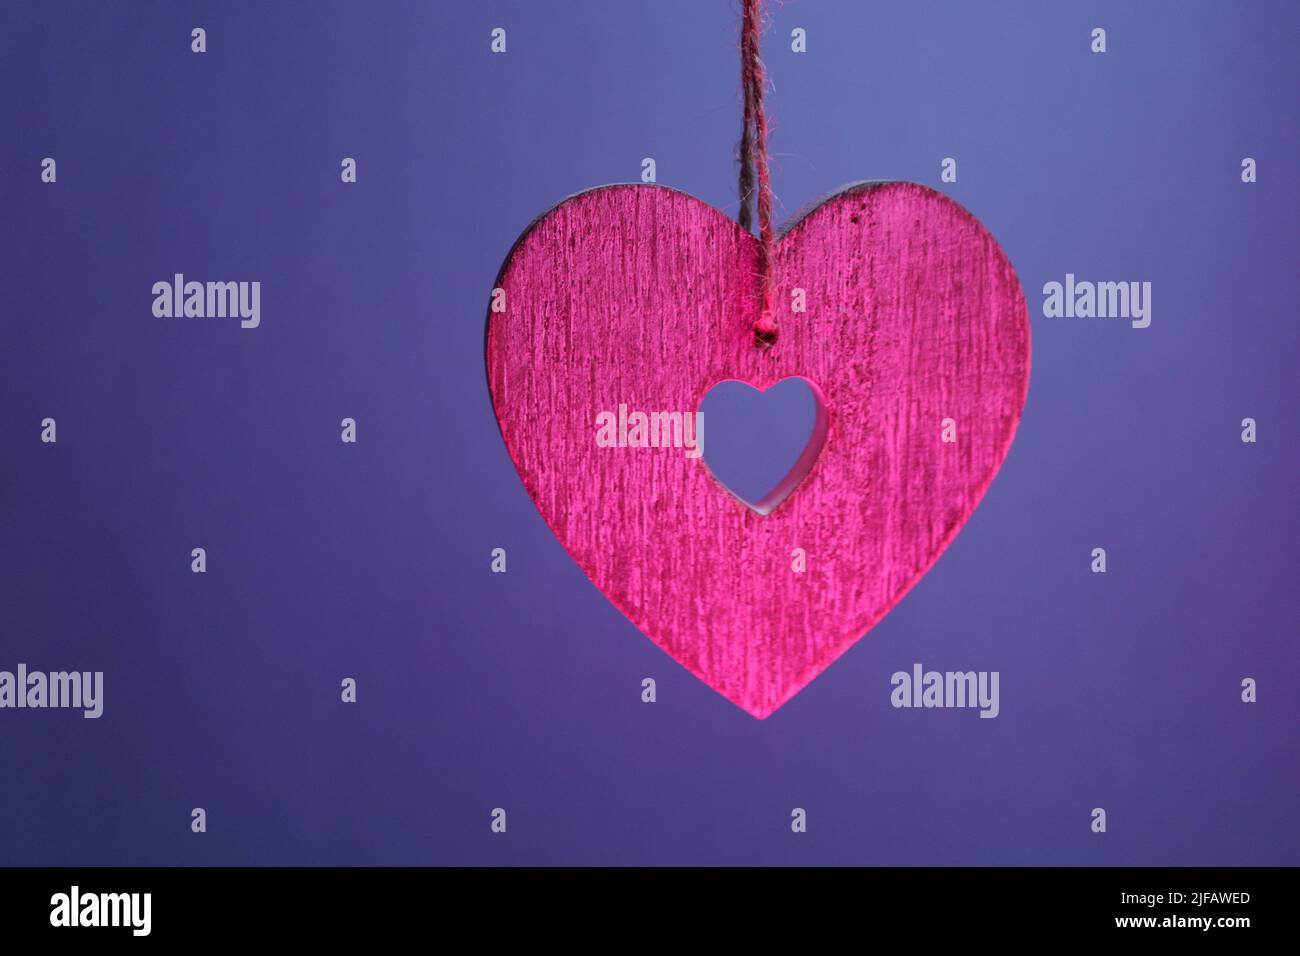 Pink wooden heart suspended by string against a dark blue-purple background Stock Photo